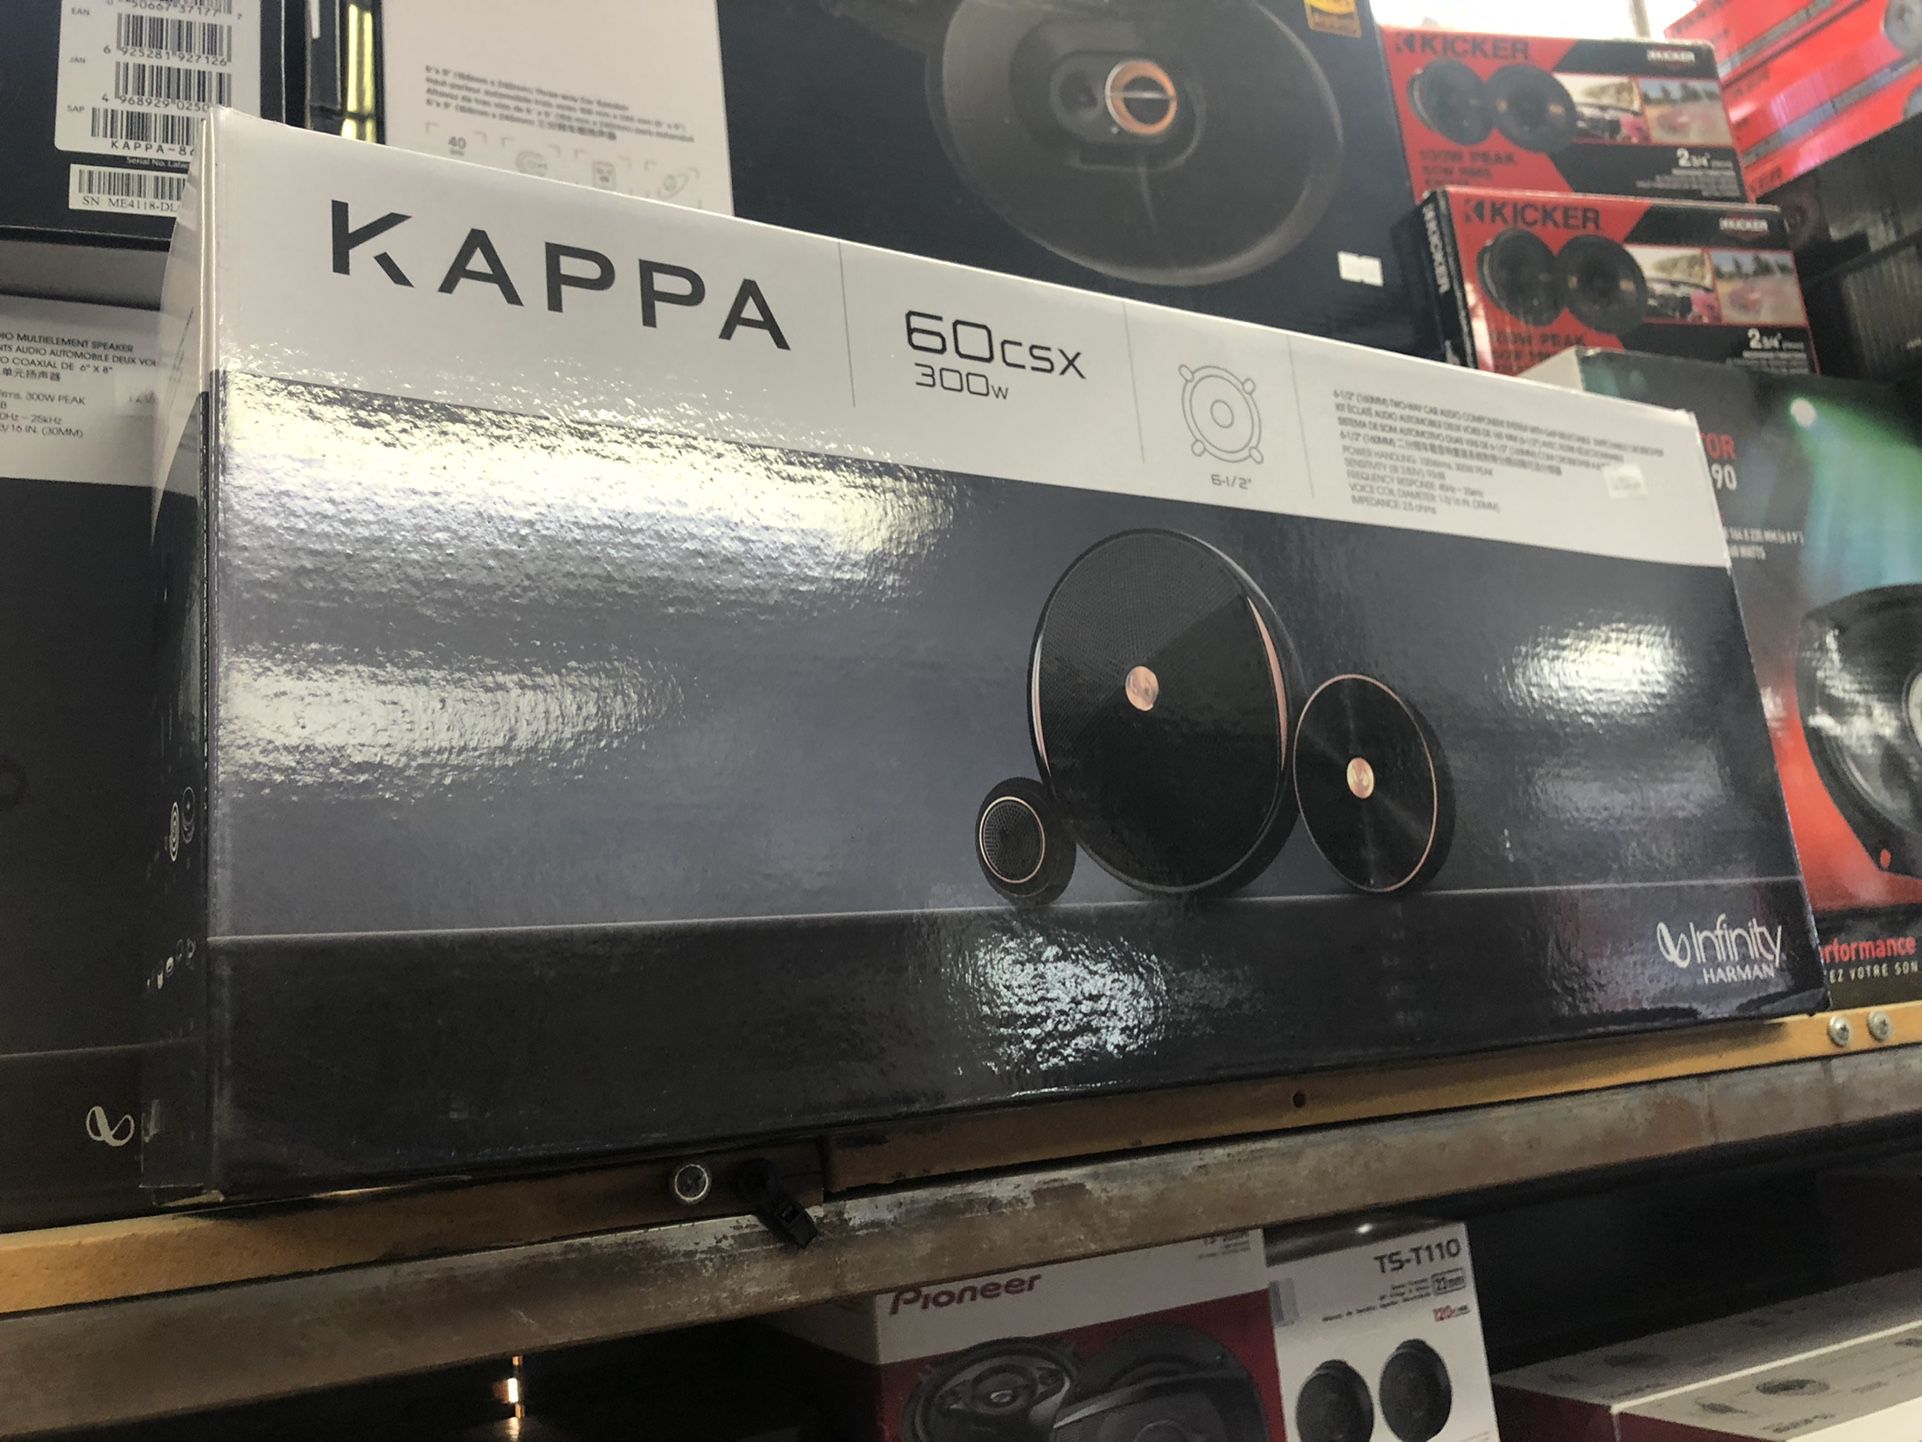 Kappa 6.5 On Sale Today For 199.99 